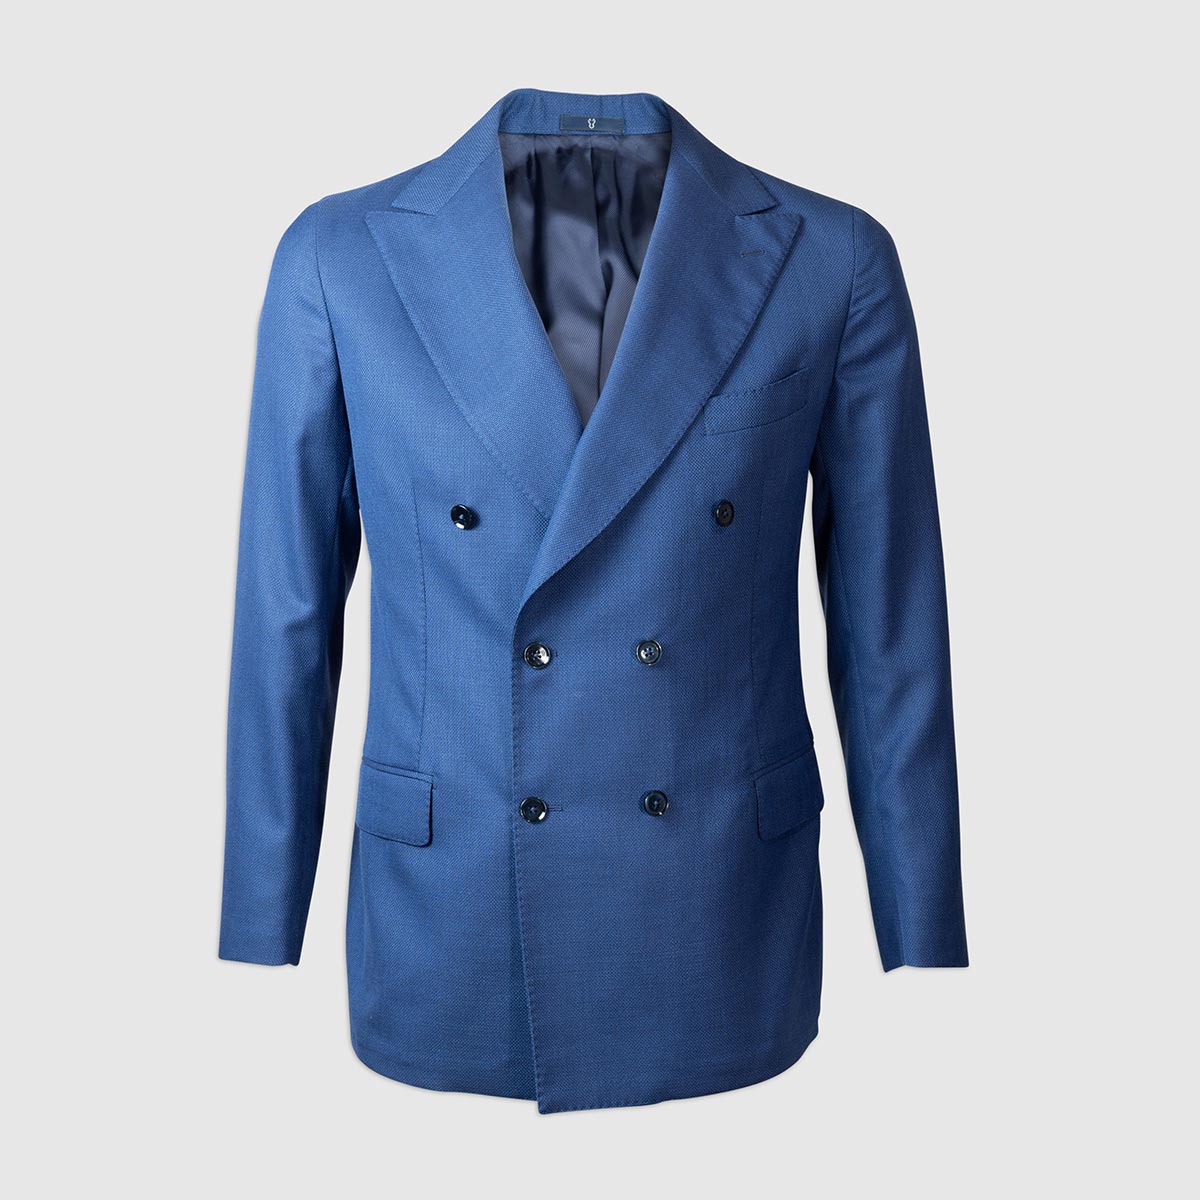 Half-lined Double-Breasted Jacket in 130’S Wool – Blue Melillo 1970 on sale 2022